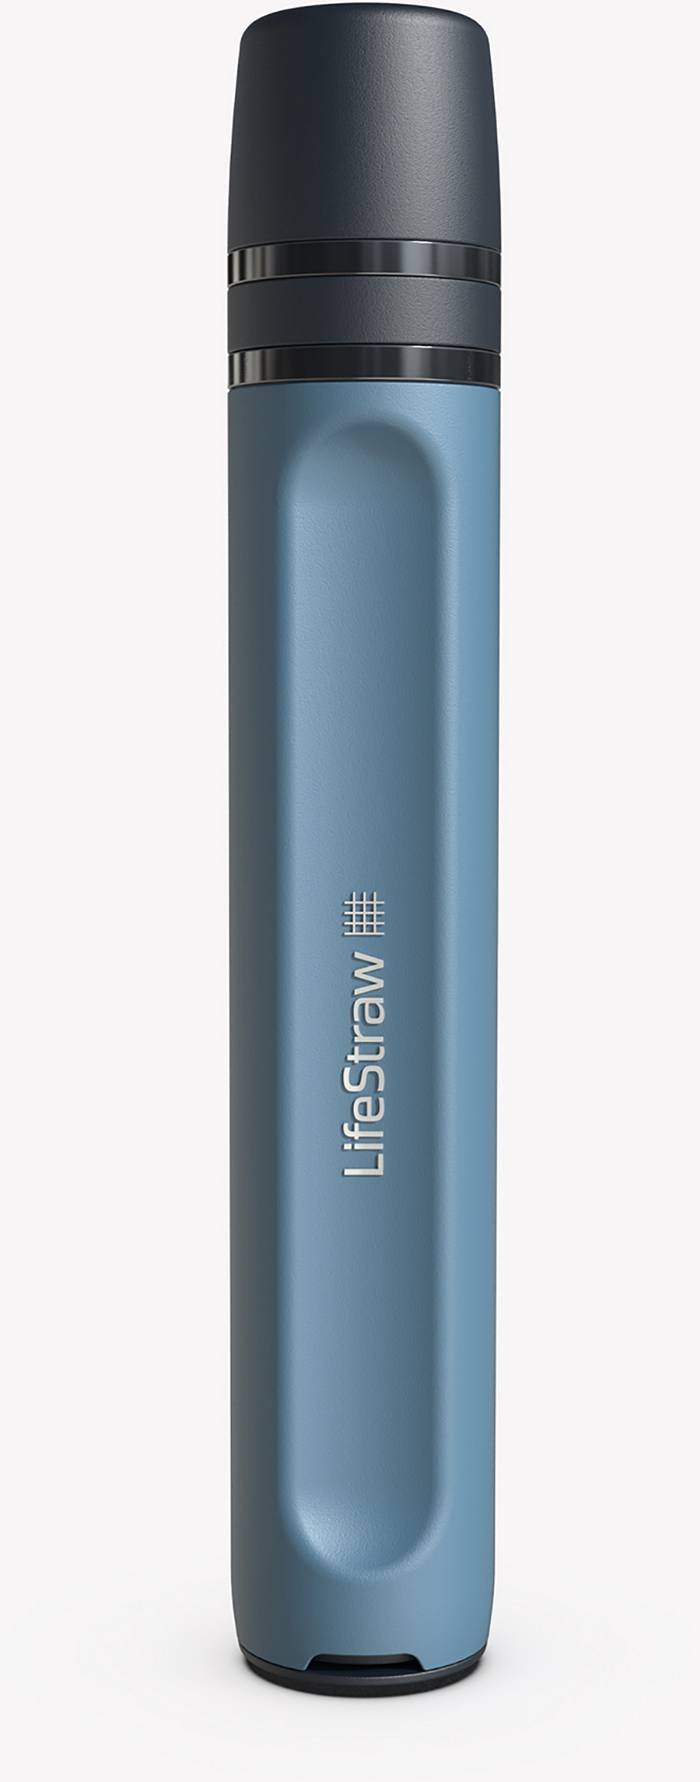 3 Ways to Drink Clean Water with the New Peak Series LifeStraw #LifeStraw # cleanwater @Lifestraw « Adafruit Industries – Makers, hackers, artists,  designers and engineers!